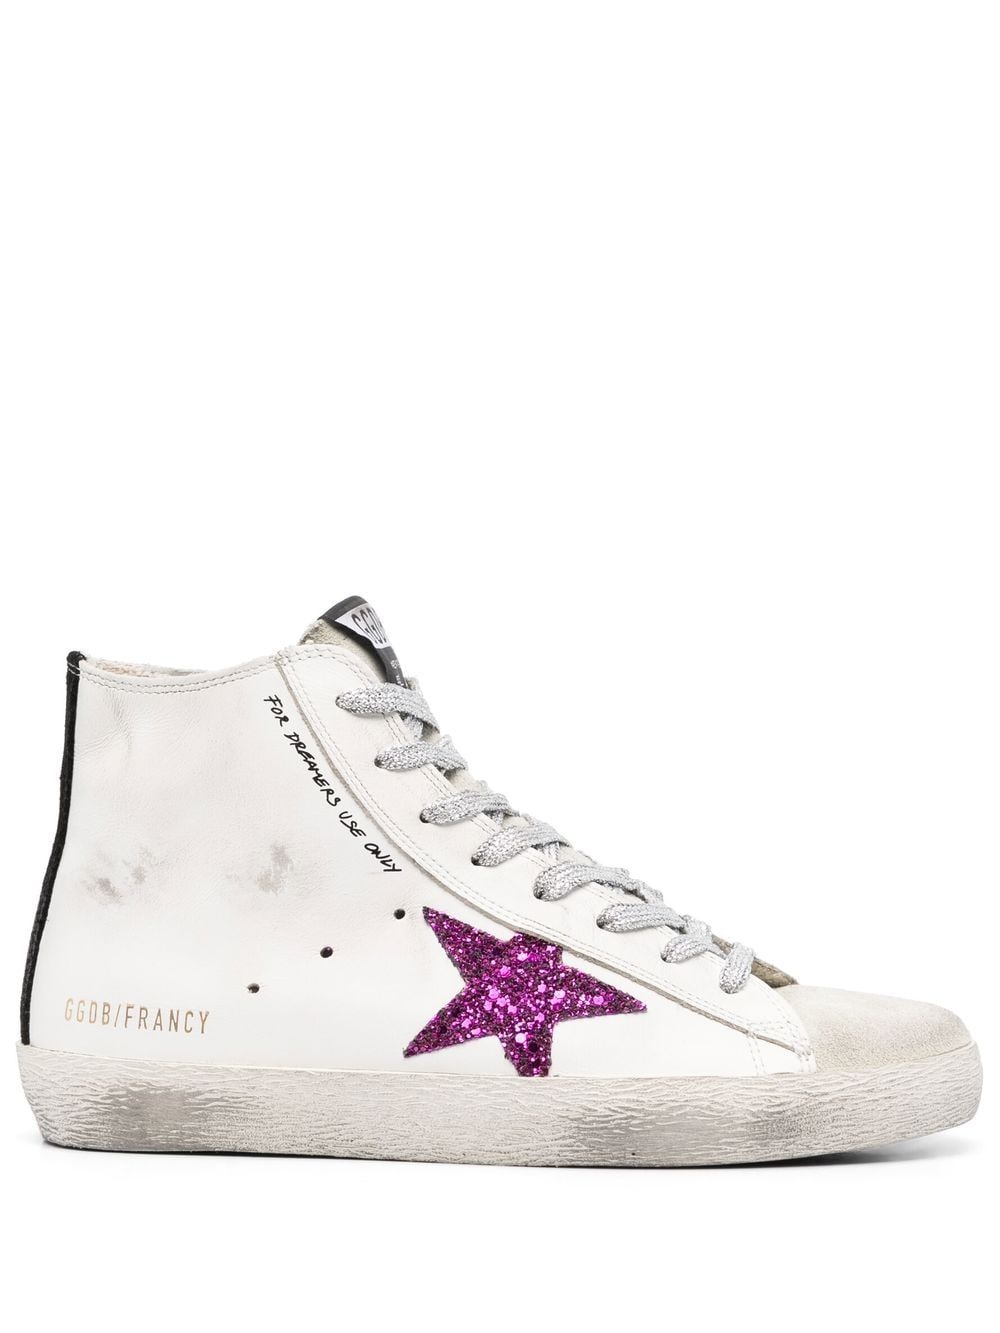 GOLDEN GOOSE Luxurious Star-Patched Leather High-Tops for Women